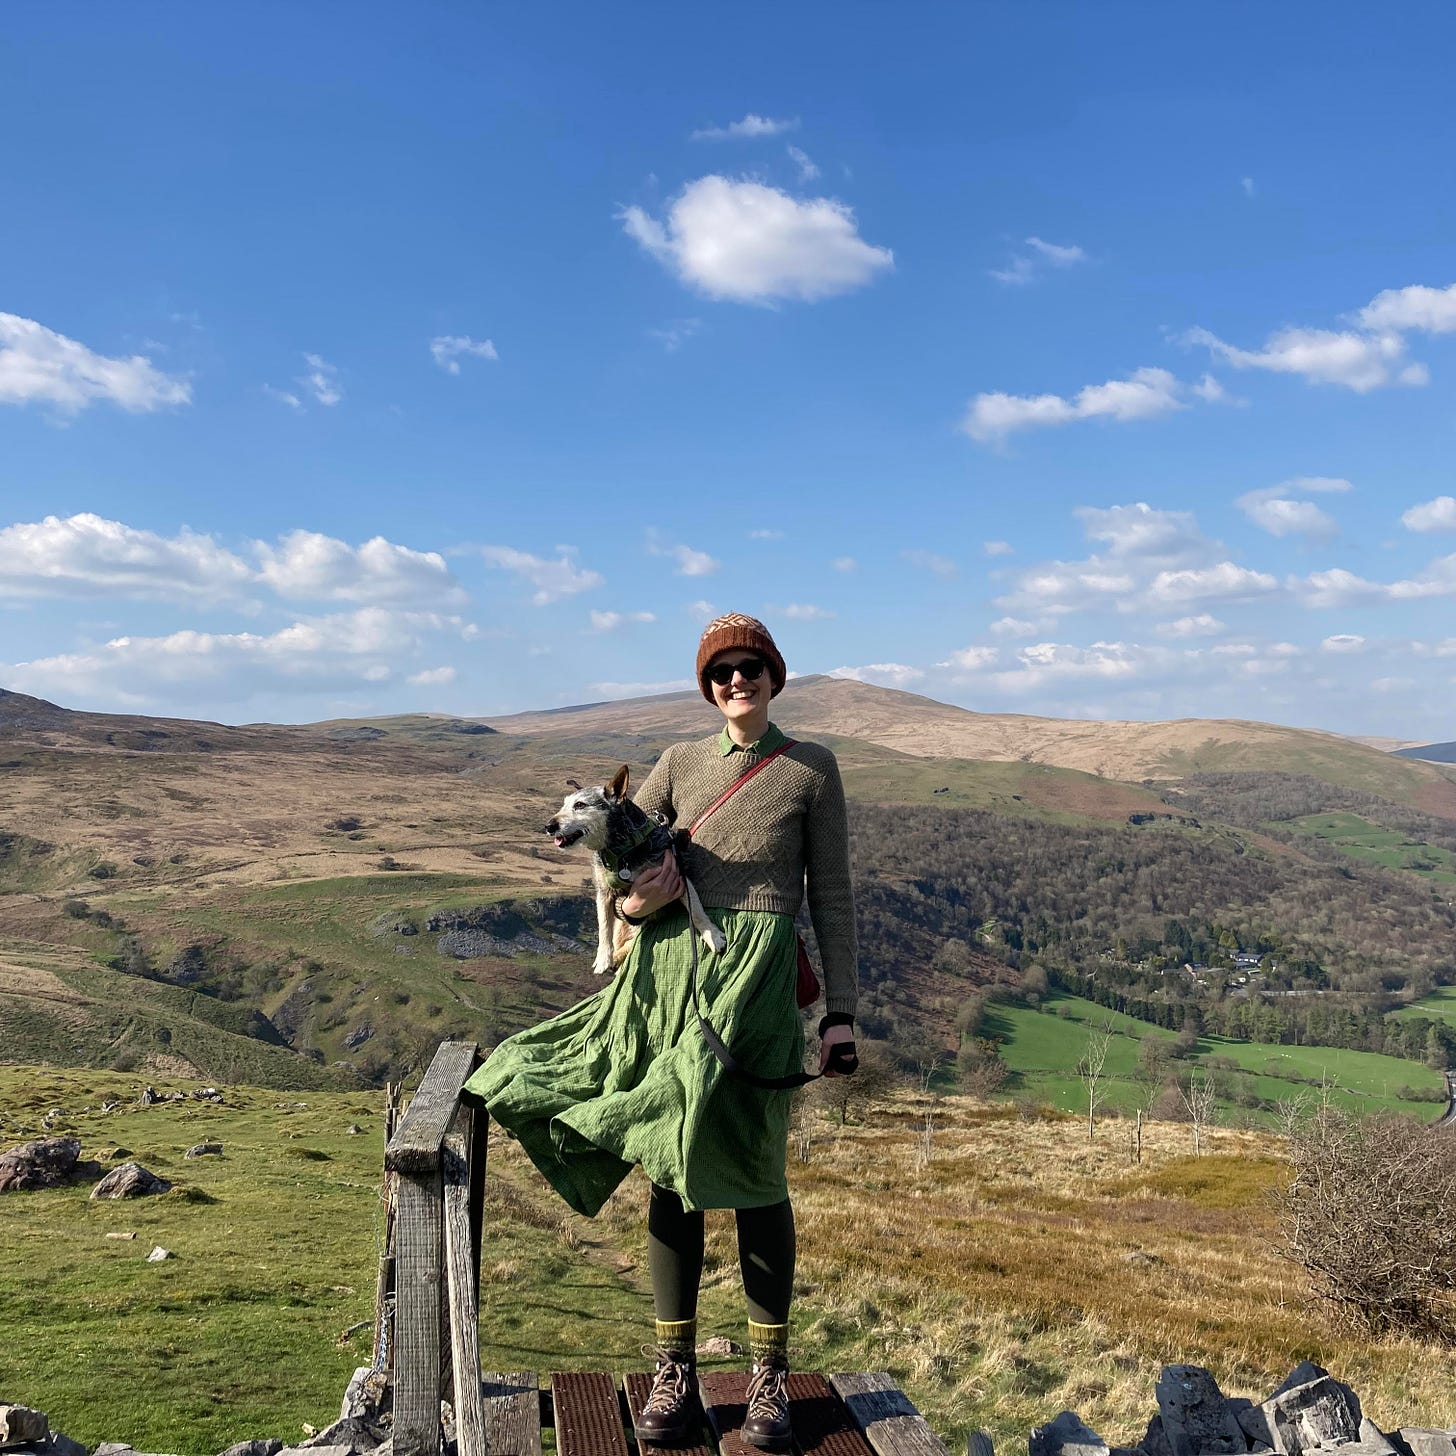  Katie the human stands on a stile halfway up a mountain, holding Jack the dog in their right arm, with a splendorous panoramic view of rolling hills and wooded slopes in the background. The sky is bright blue and speckled with fluffy white clouds. Katie is wearing a woolly hat, sunglasses, woolly jumper, green dress that is billowing in the wind, green leggings, woolly socks and walking boots. Jack is gazing off left towards the sheep.